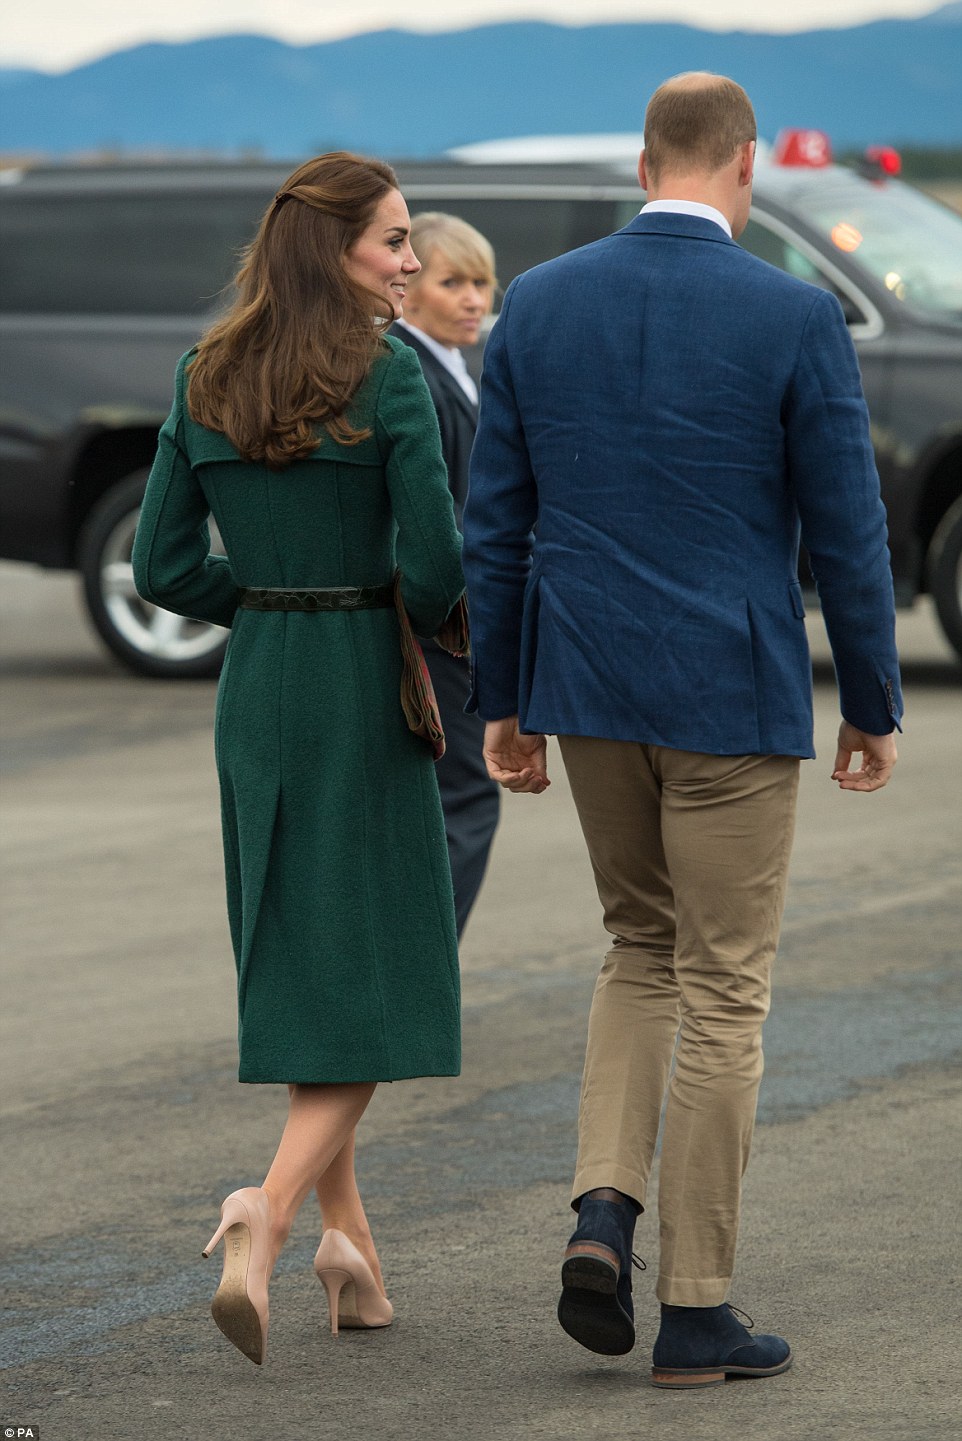 The Cambridges left for the Kwanlin Dun cultural centre where an arts show was staged to welcome them before spending Tuesday night in an unprepossessing £95-a-night hotel